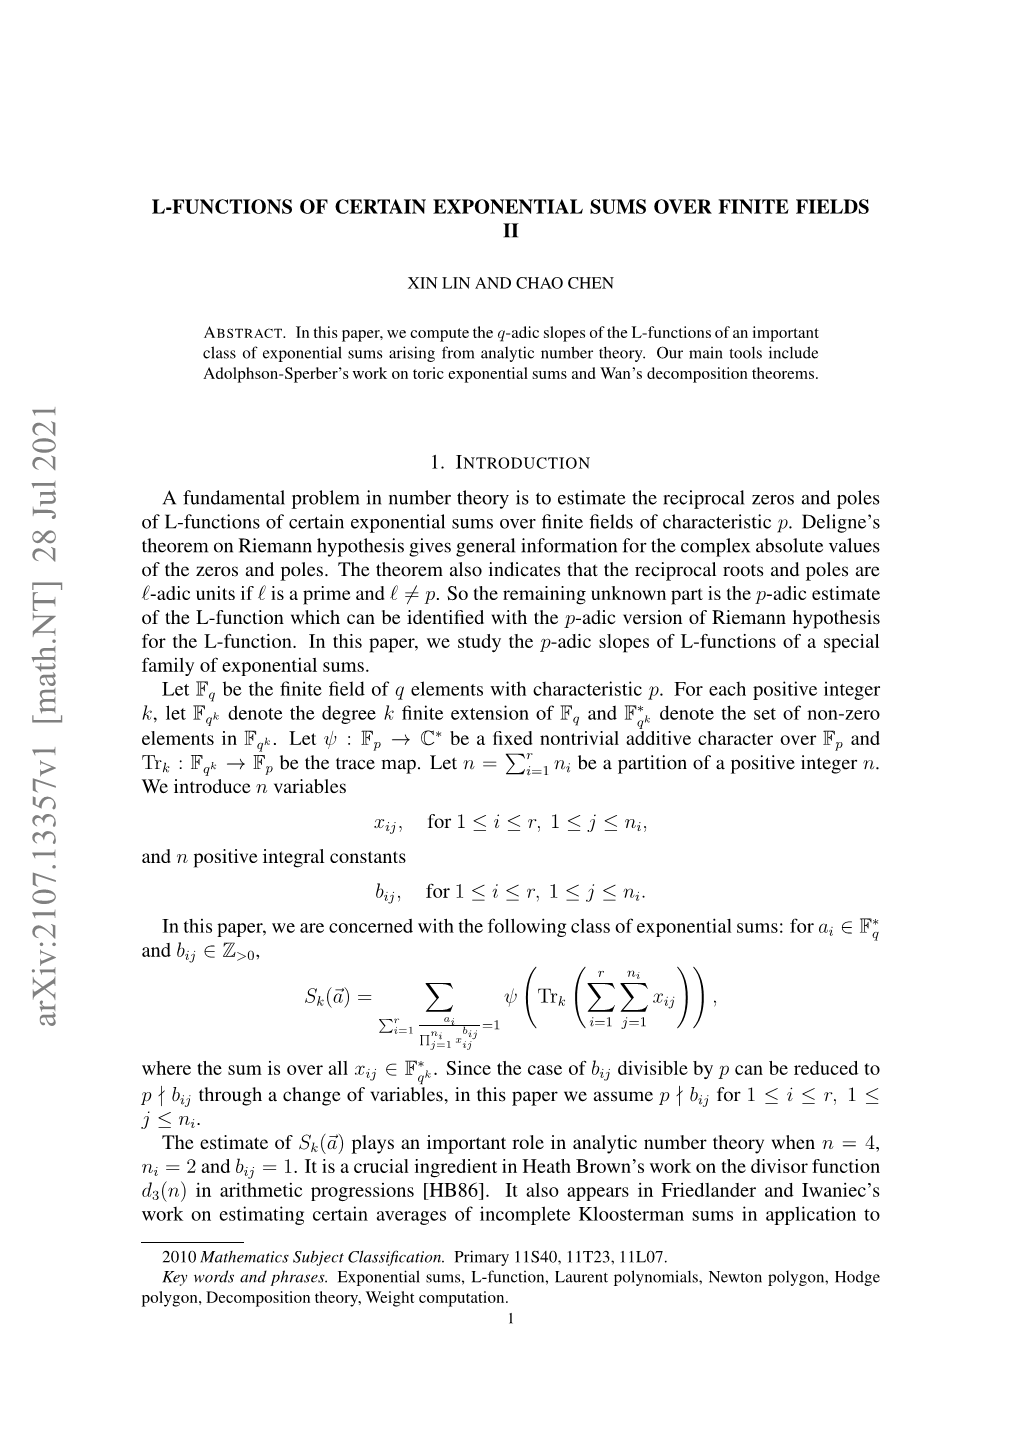 L-Functions of Certain Exponential Sums Over Finite Fields Ii 3